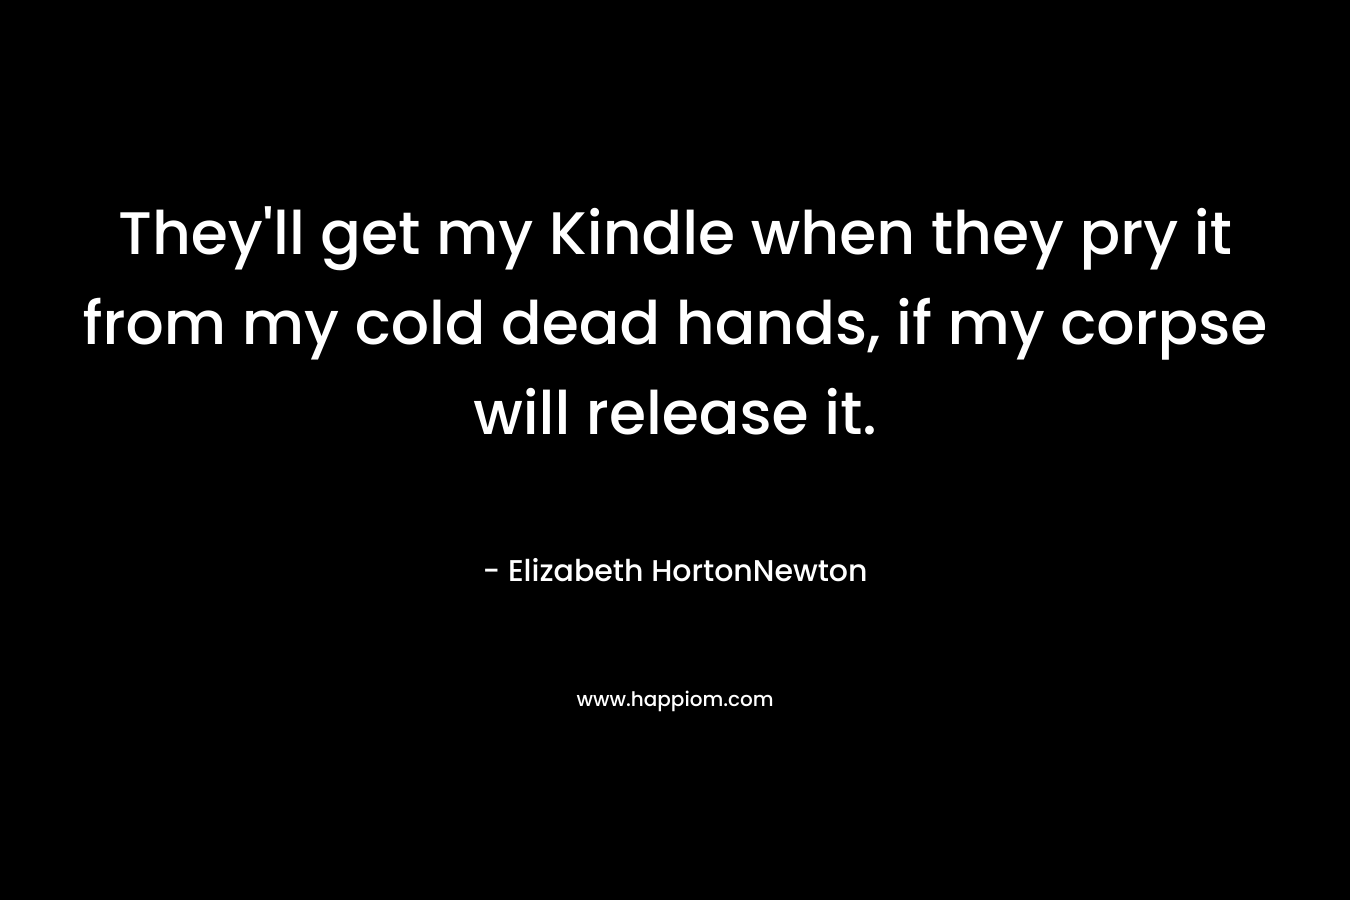 They'll get my Kindle when they pry it from my cold dead hands, if my corpse will release it.